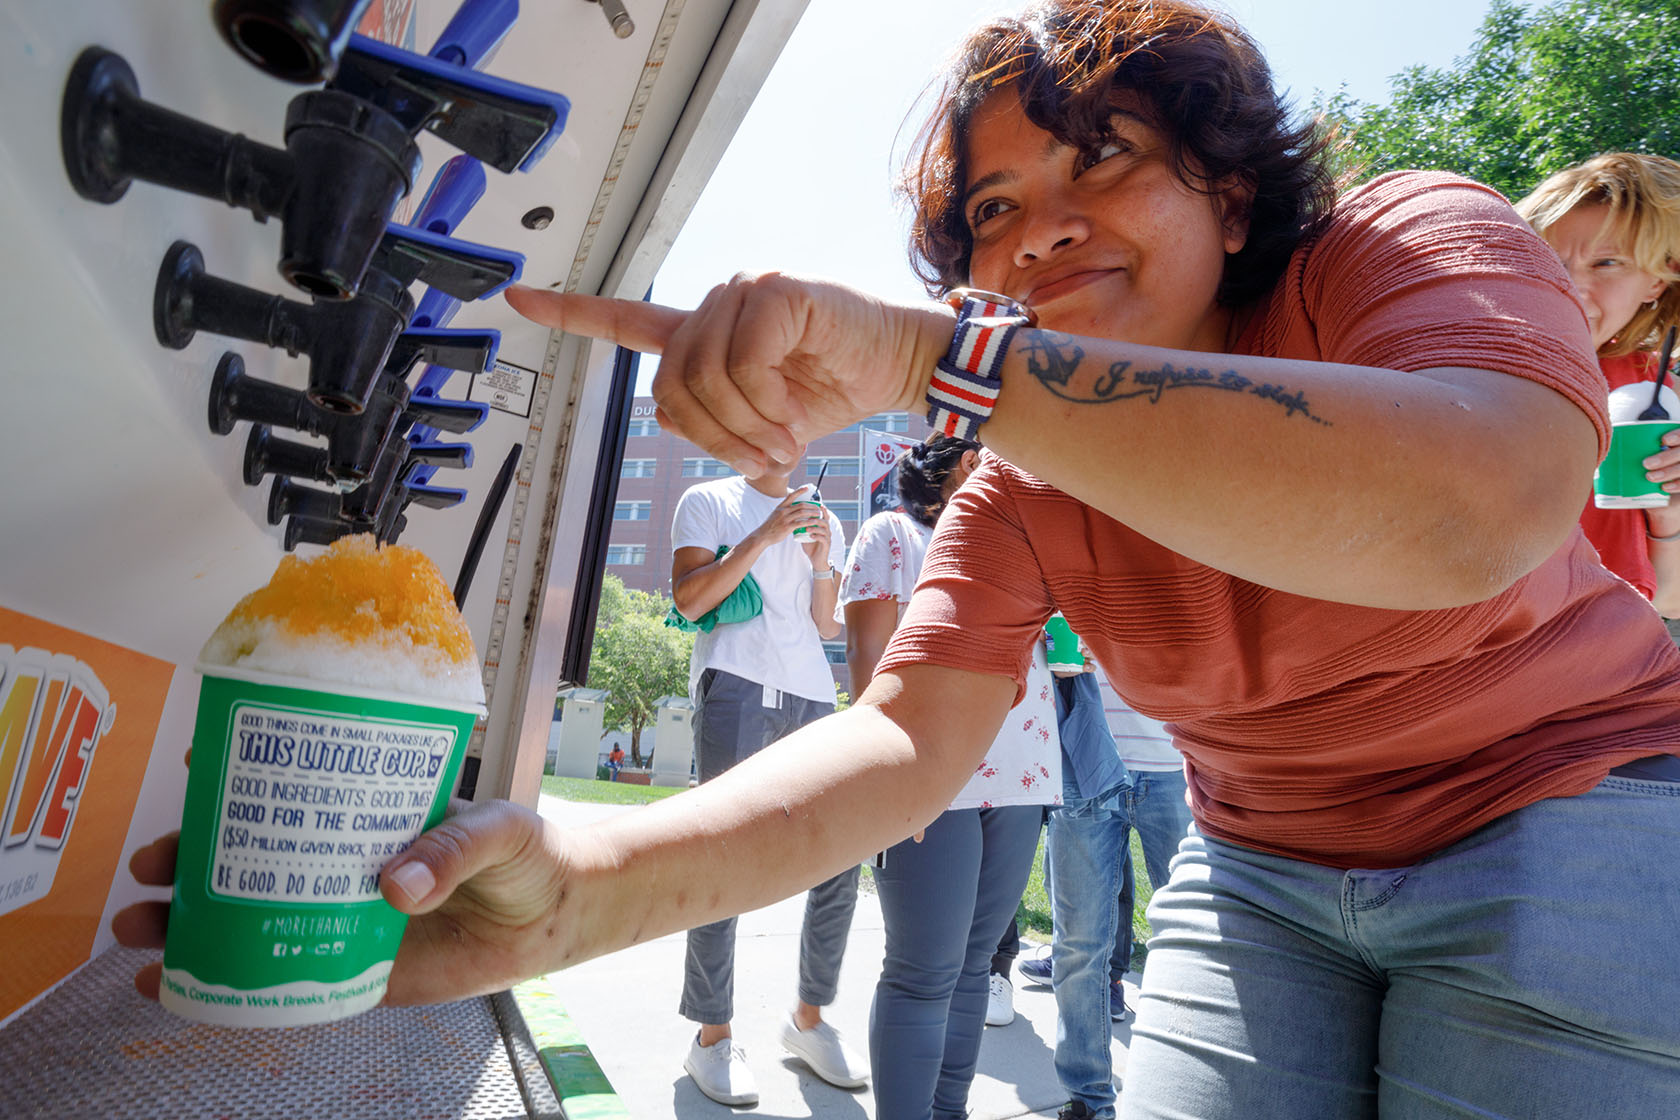 Debalina Mukhopadhyay&comma; PhD&comma; adds flavor to her shaved ice at the "Summer Chill" event sponsored by UNeMed and the UNMC Office of the Vice Chancellor for Research&period;